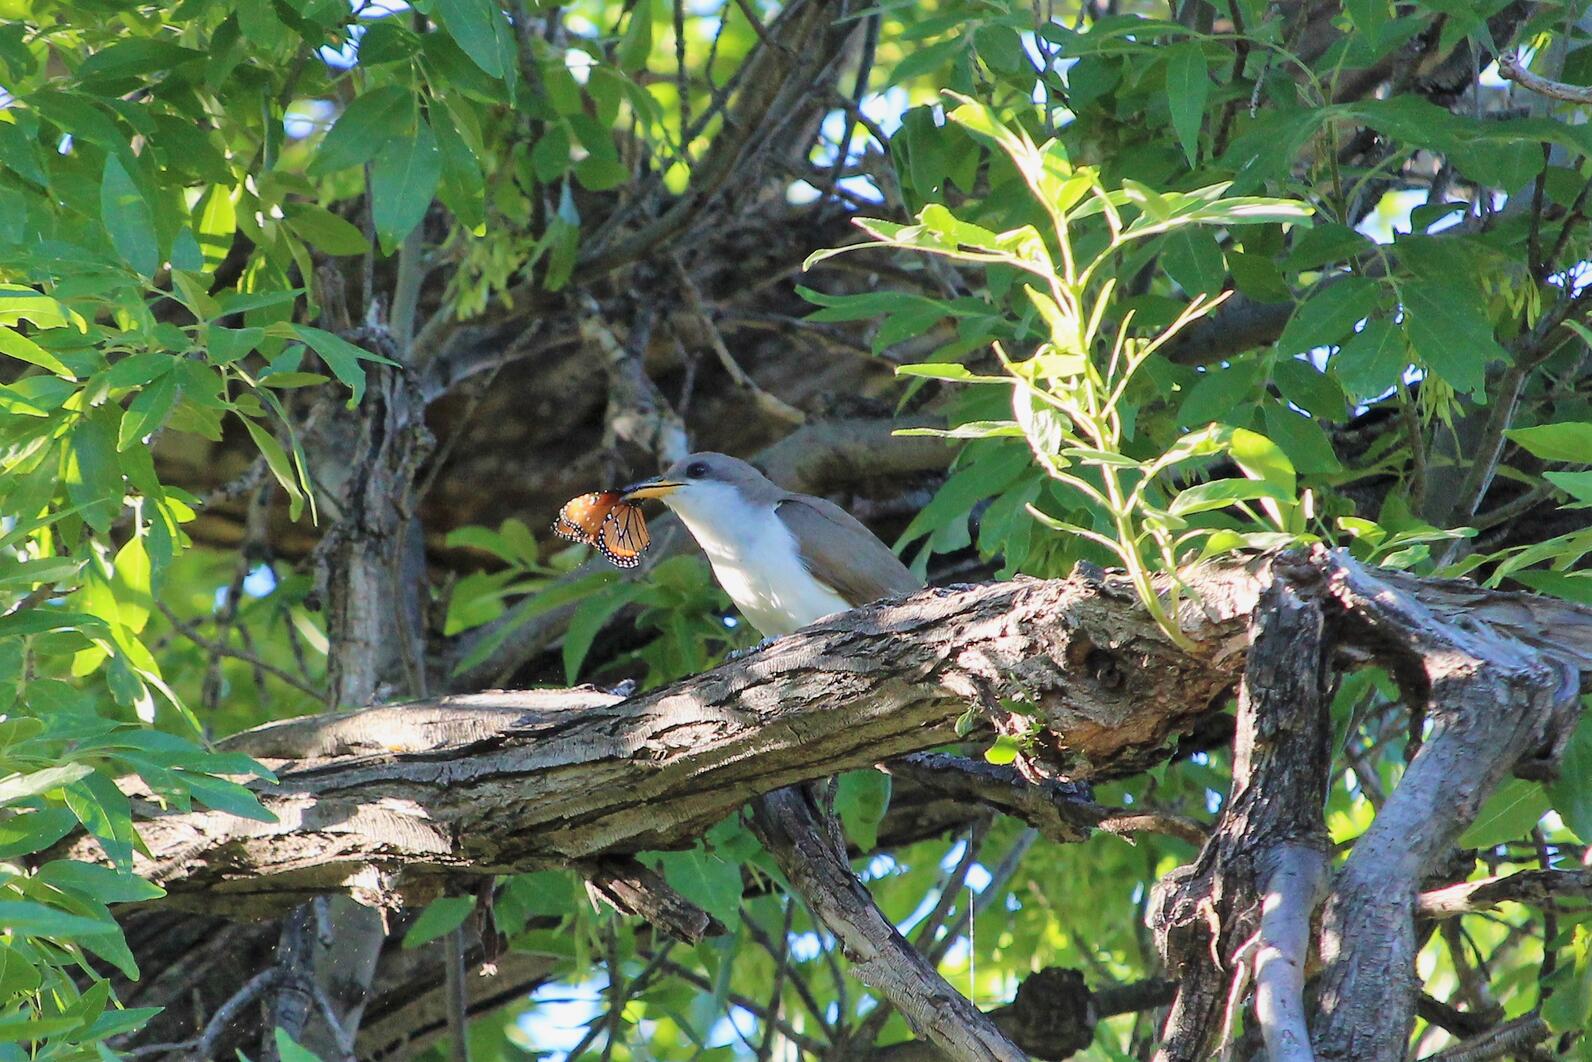 Yellow-billed Cuckoo with Queen Butterfly prey